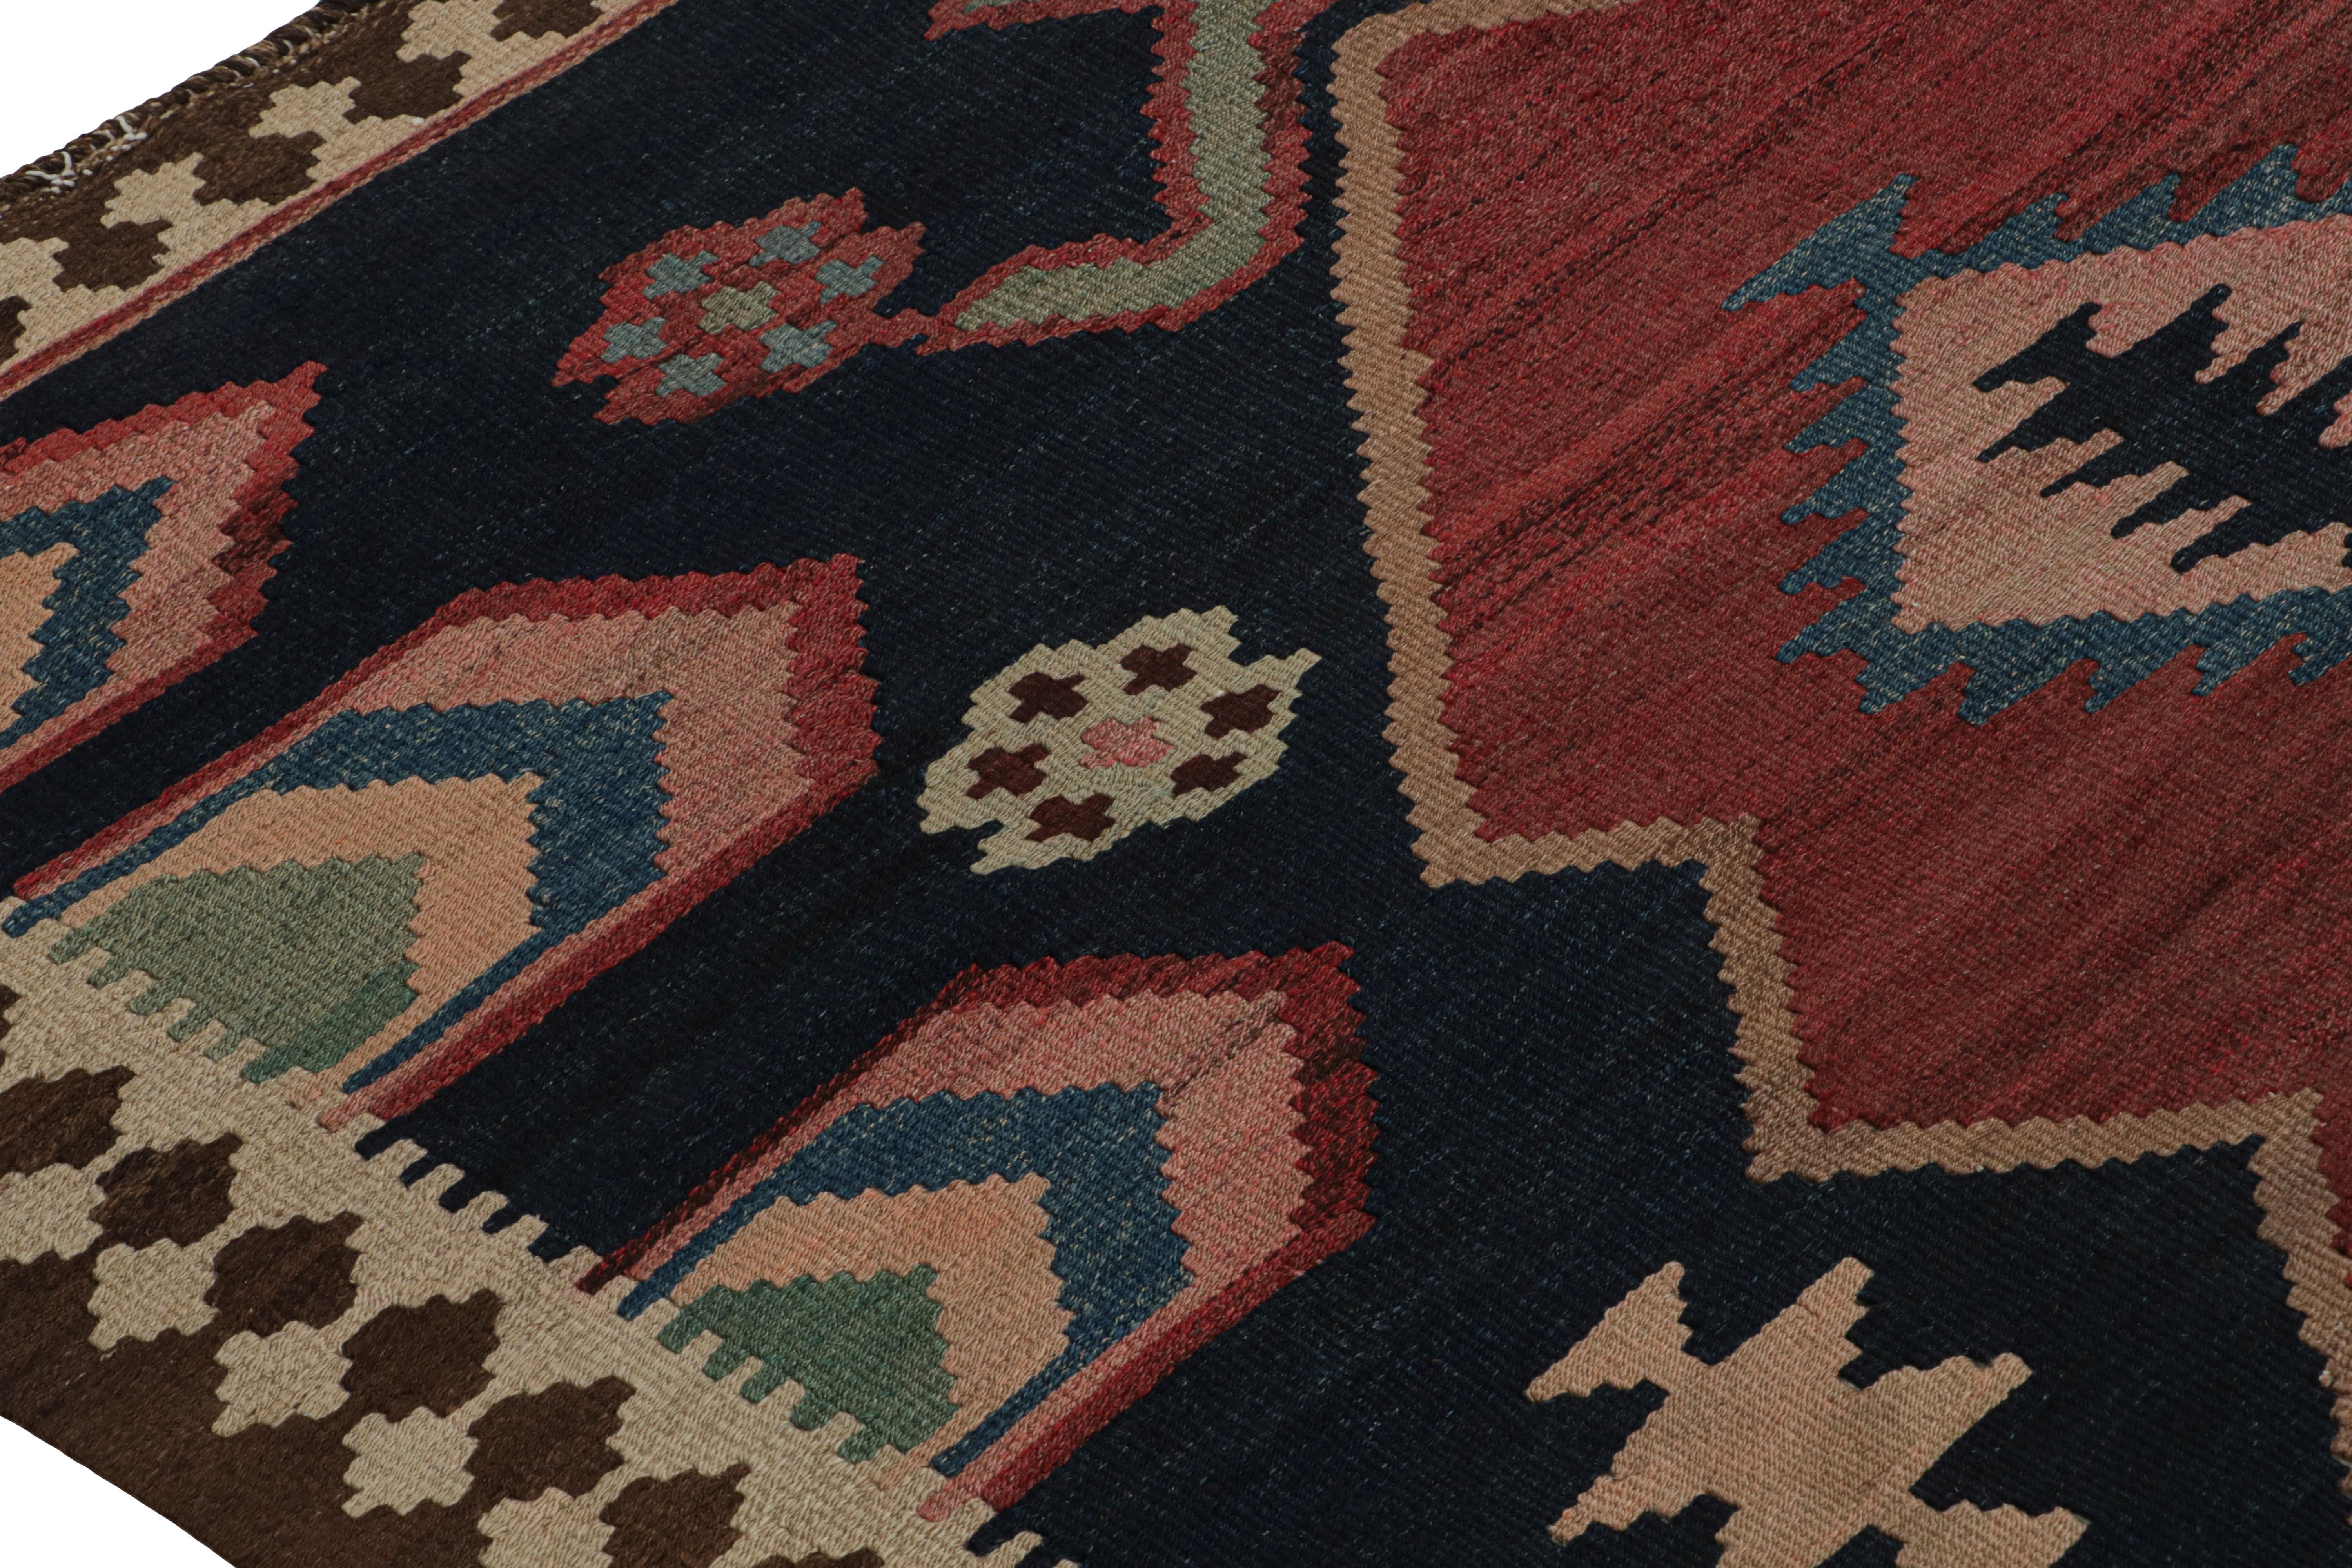 Vintage Afghani tribal Kilim rug, with Open Field and Medallion, Rug & Kilim In Good Condition For Sale In Long Island City, NY